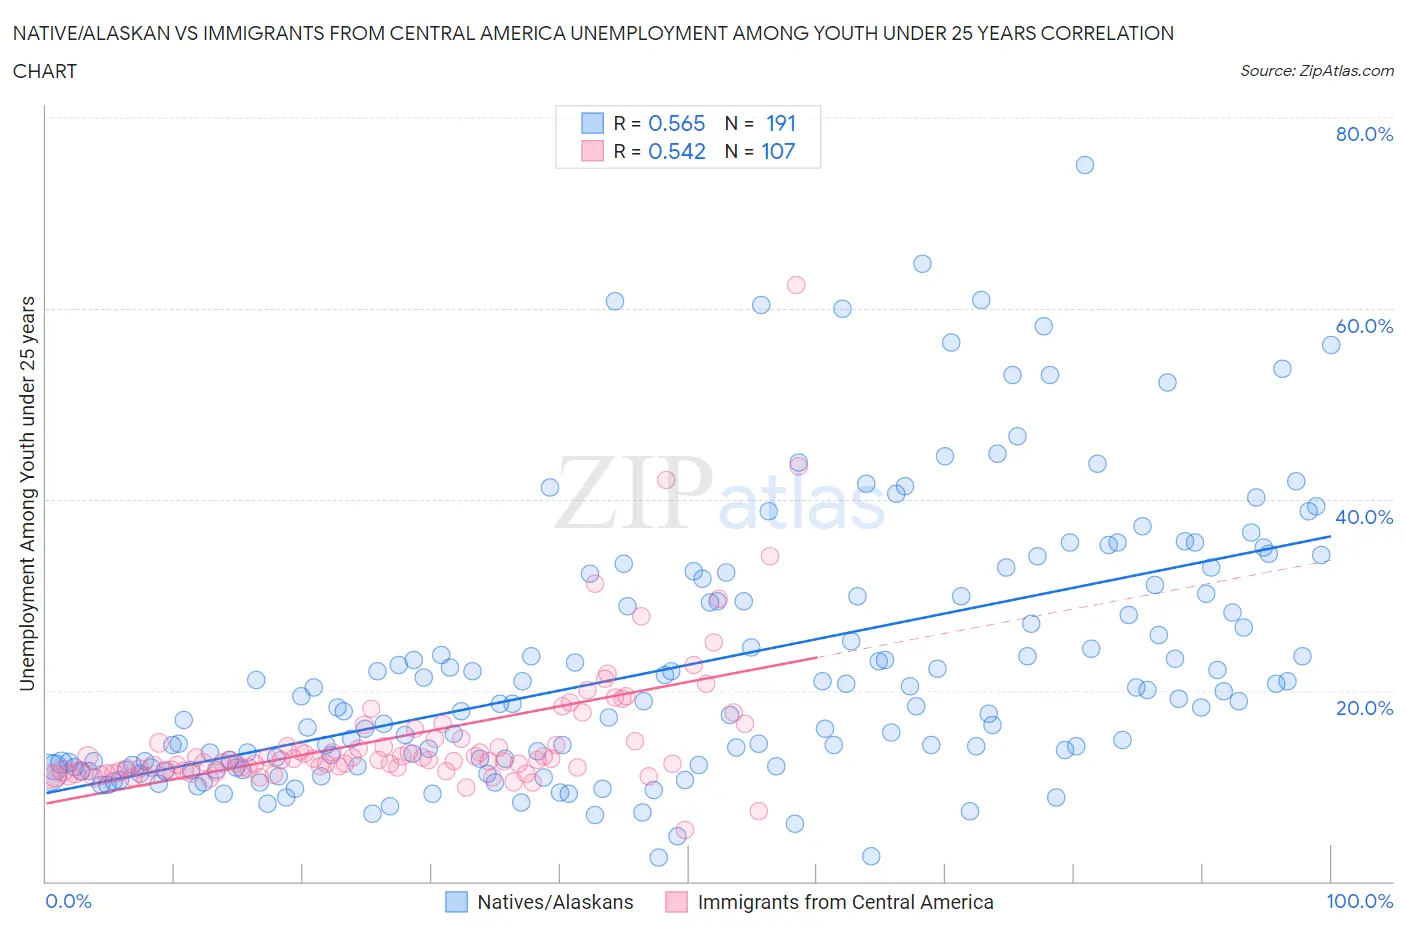 Native/Alaskan vs Immigrants from Central America Unemployment Among Youth under 25 years